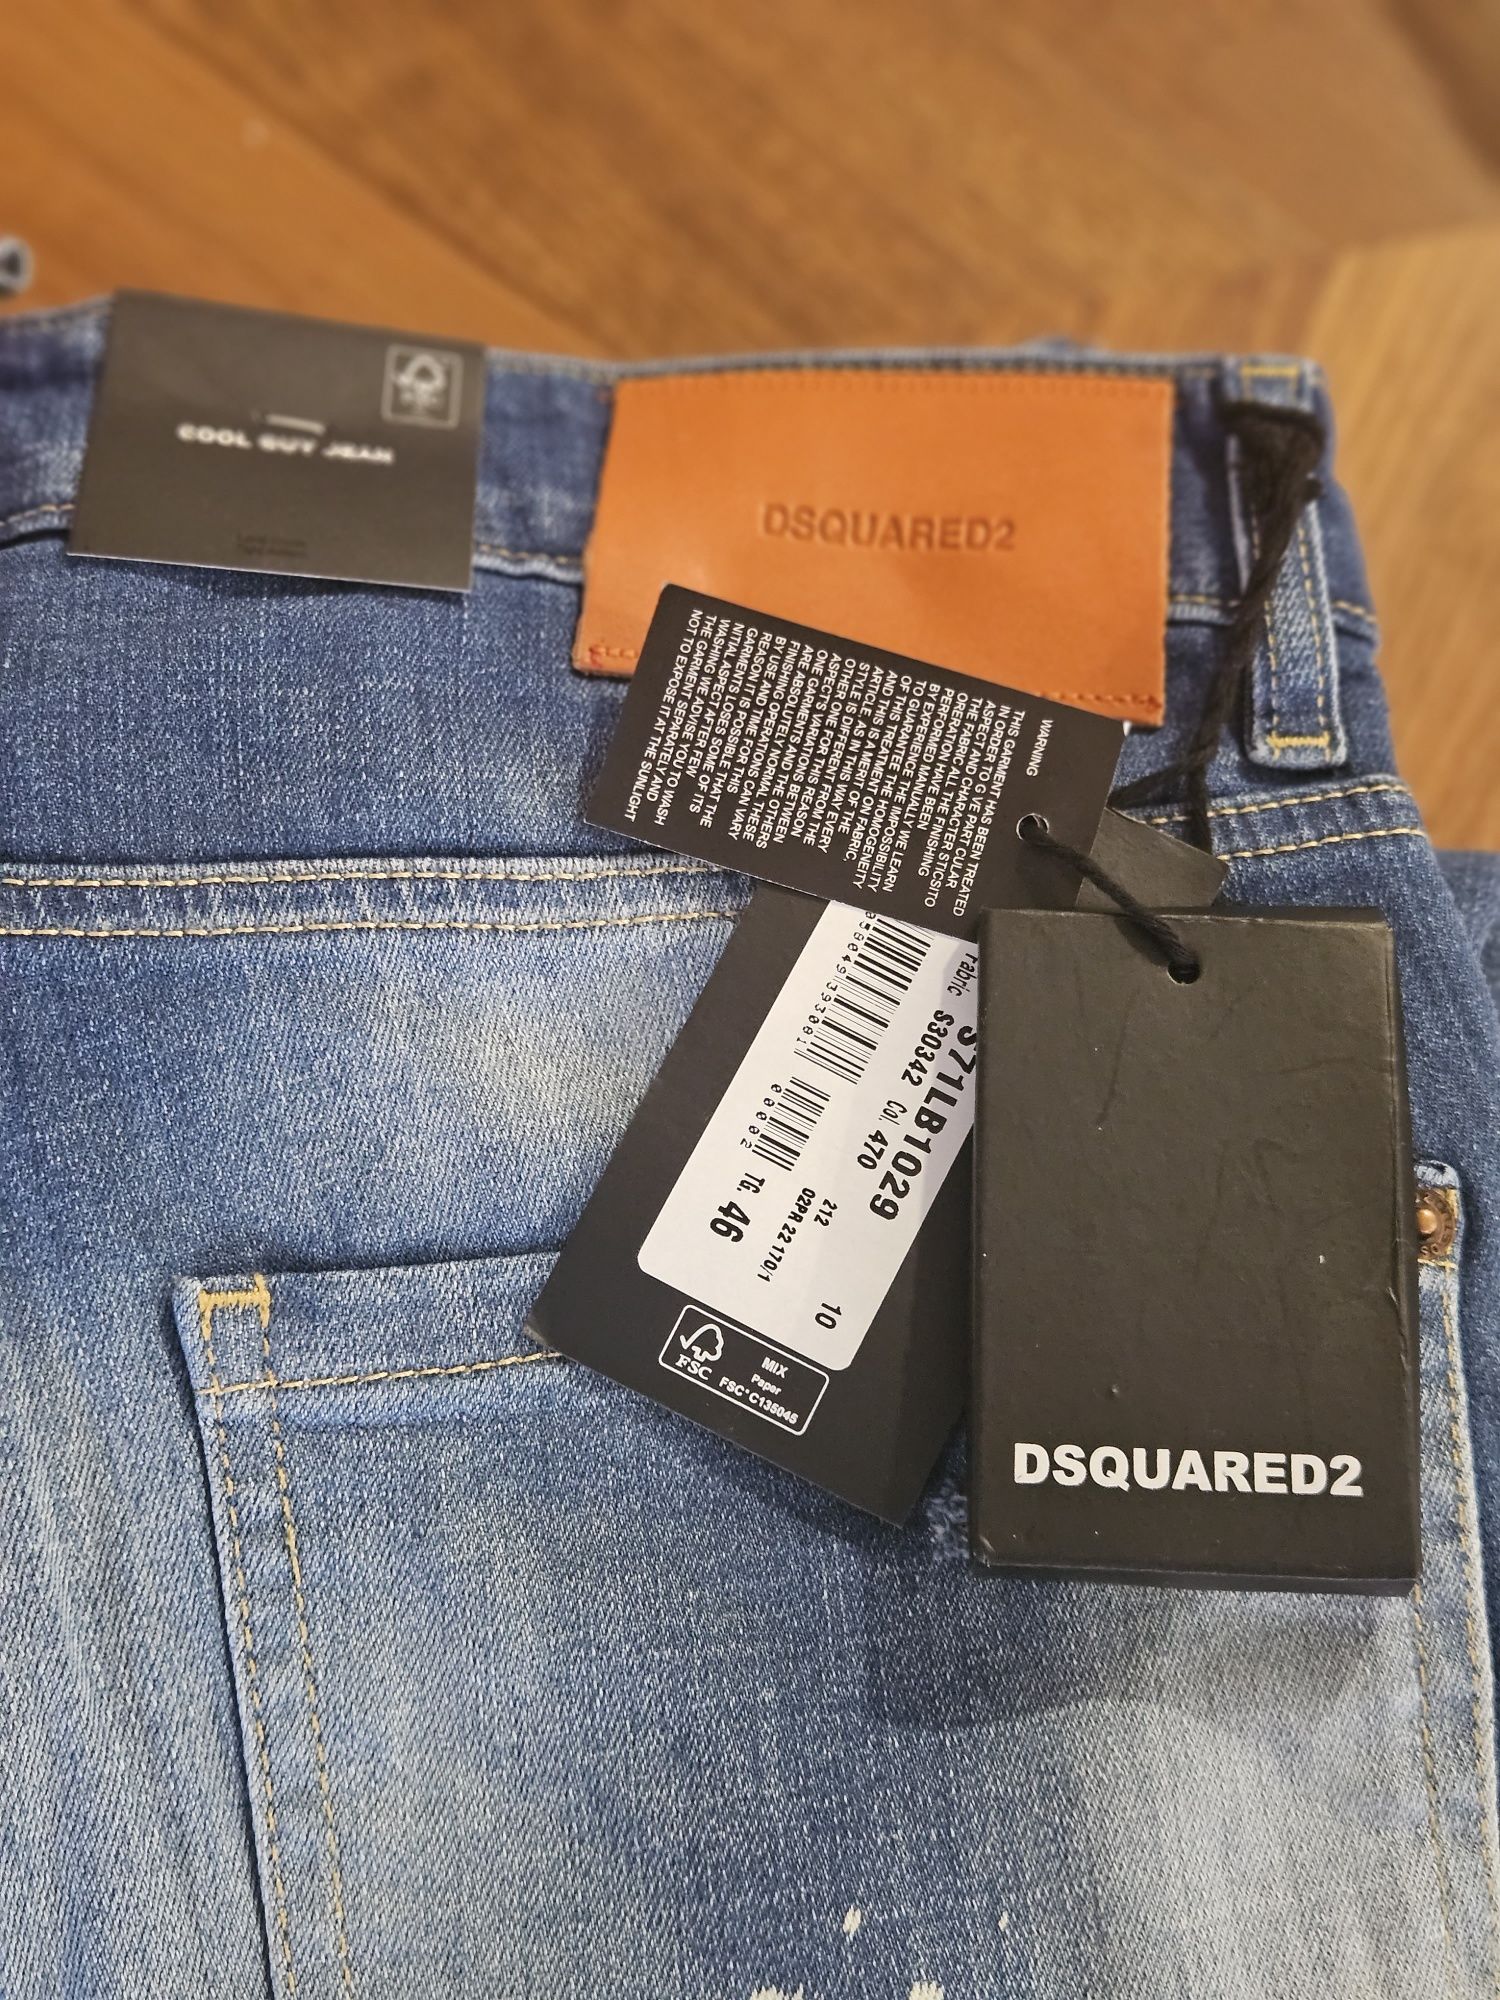 Dsquared2 jeans 46